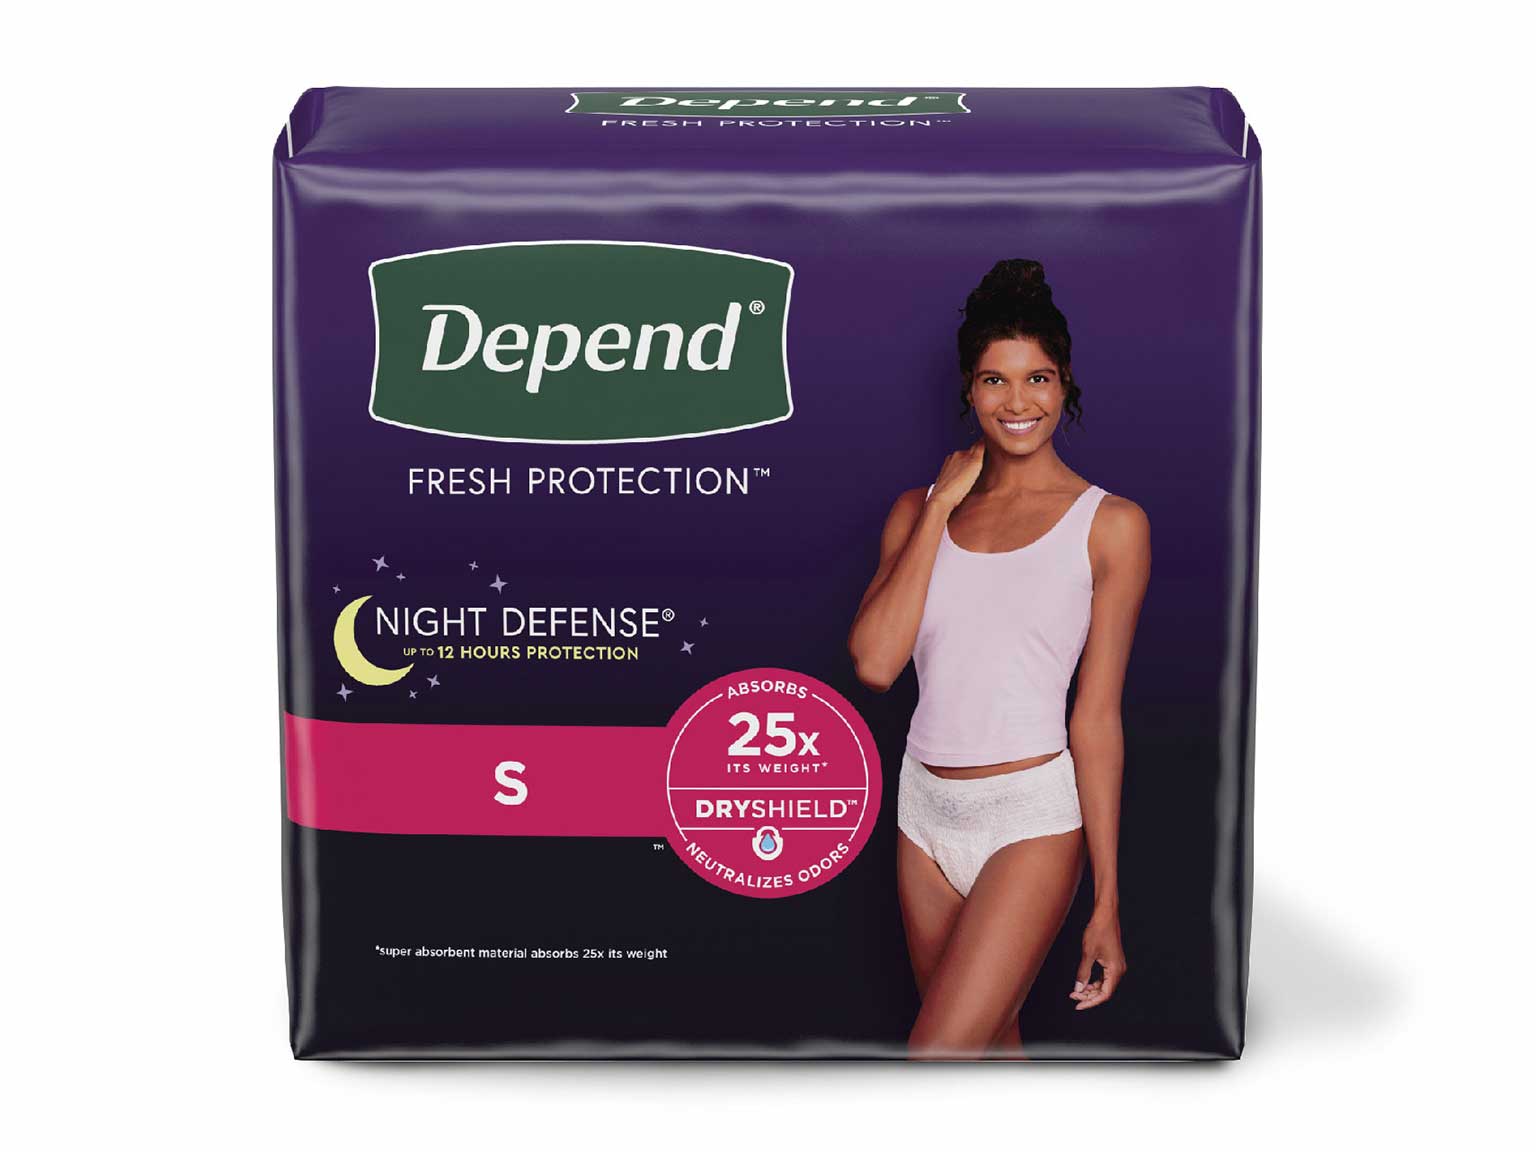 pampers for women